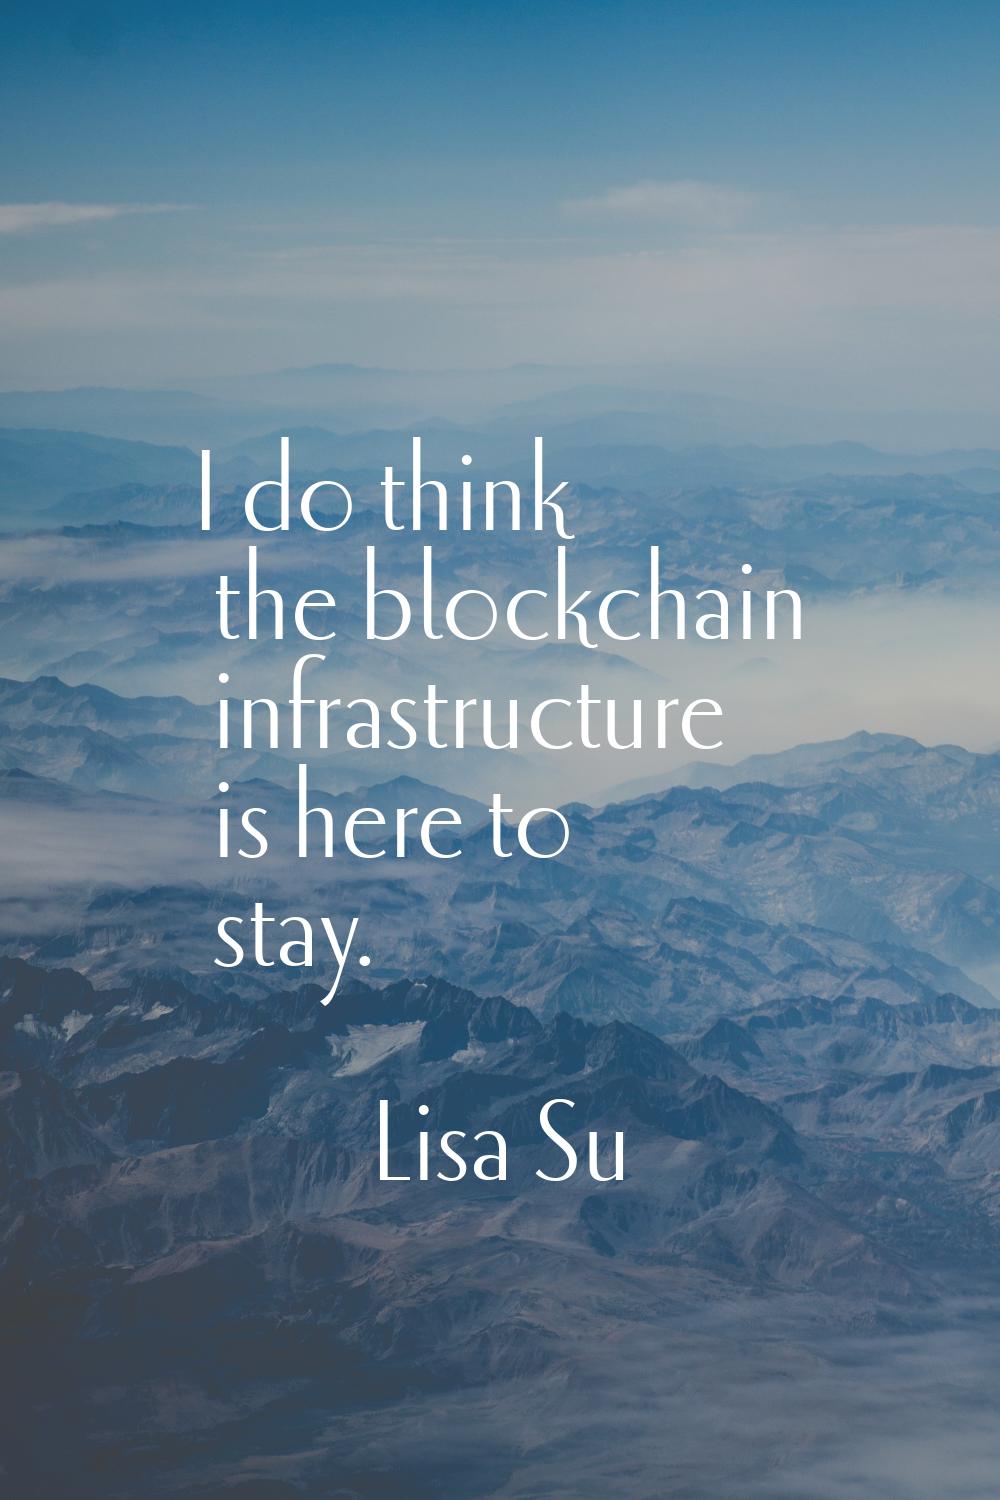 I do think the blockchain infrastructure is here to stay.